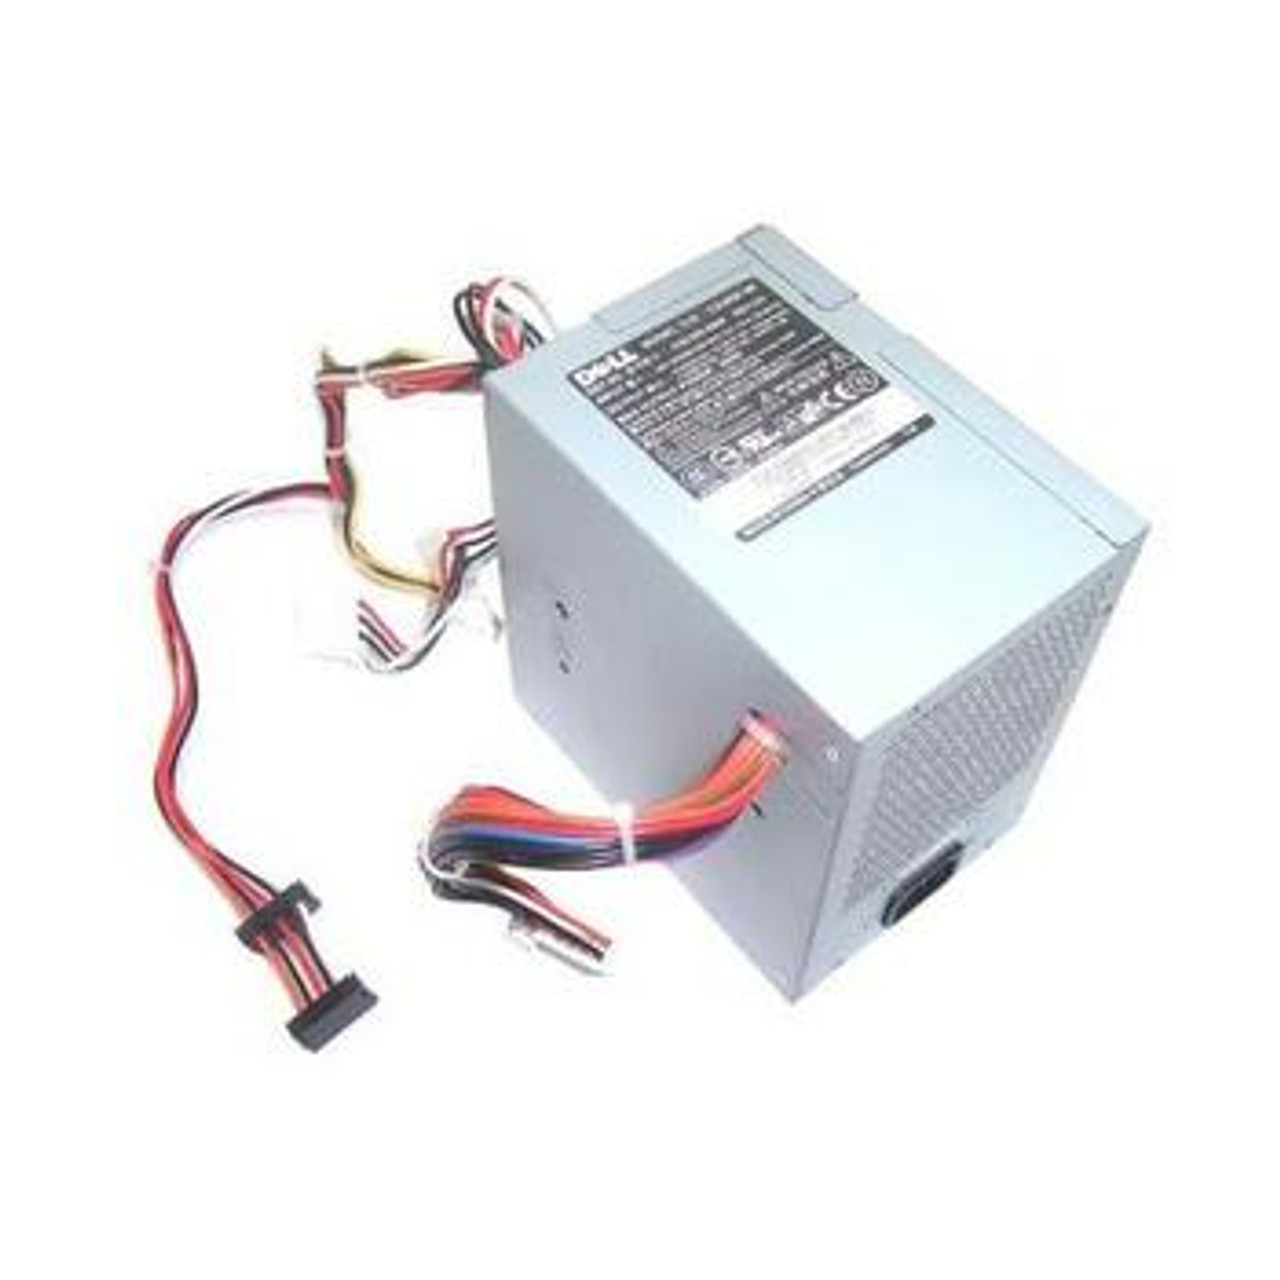 0UH870 Dell 305-Watts Power Supply for Dimension 5100 and OptiPlex GX620